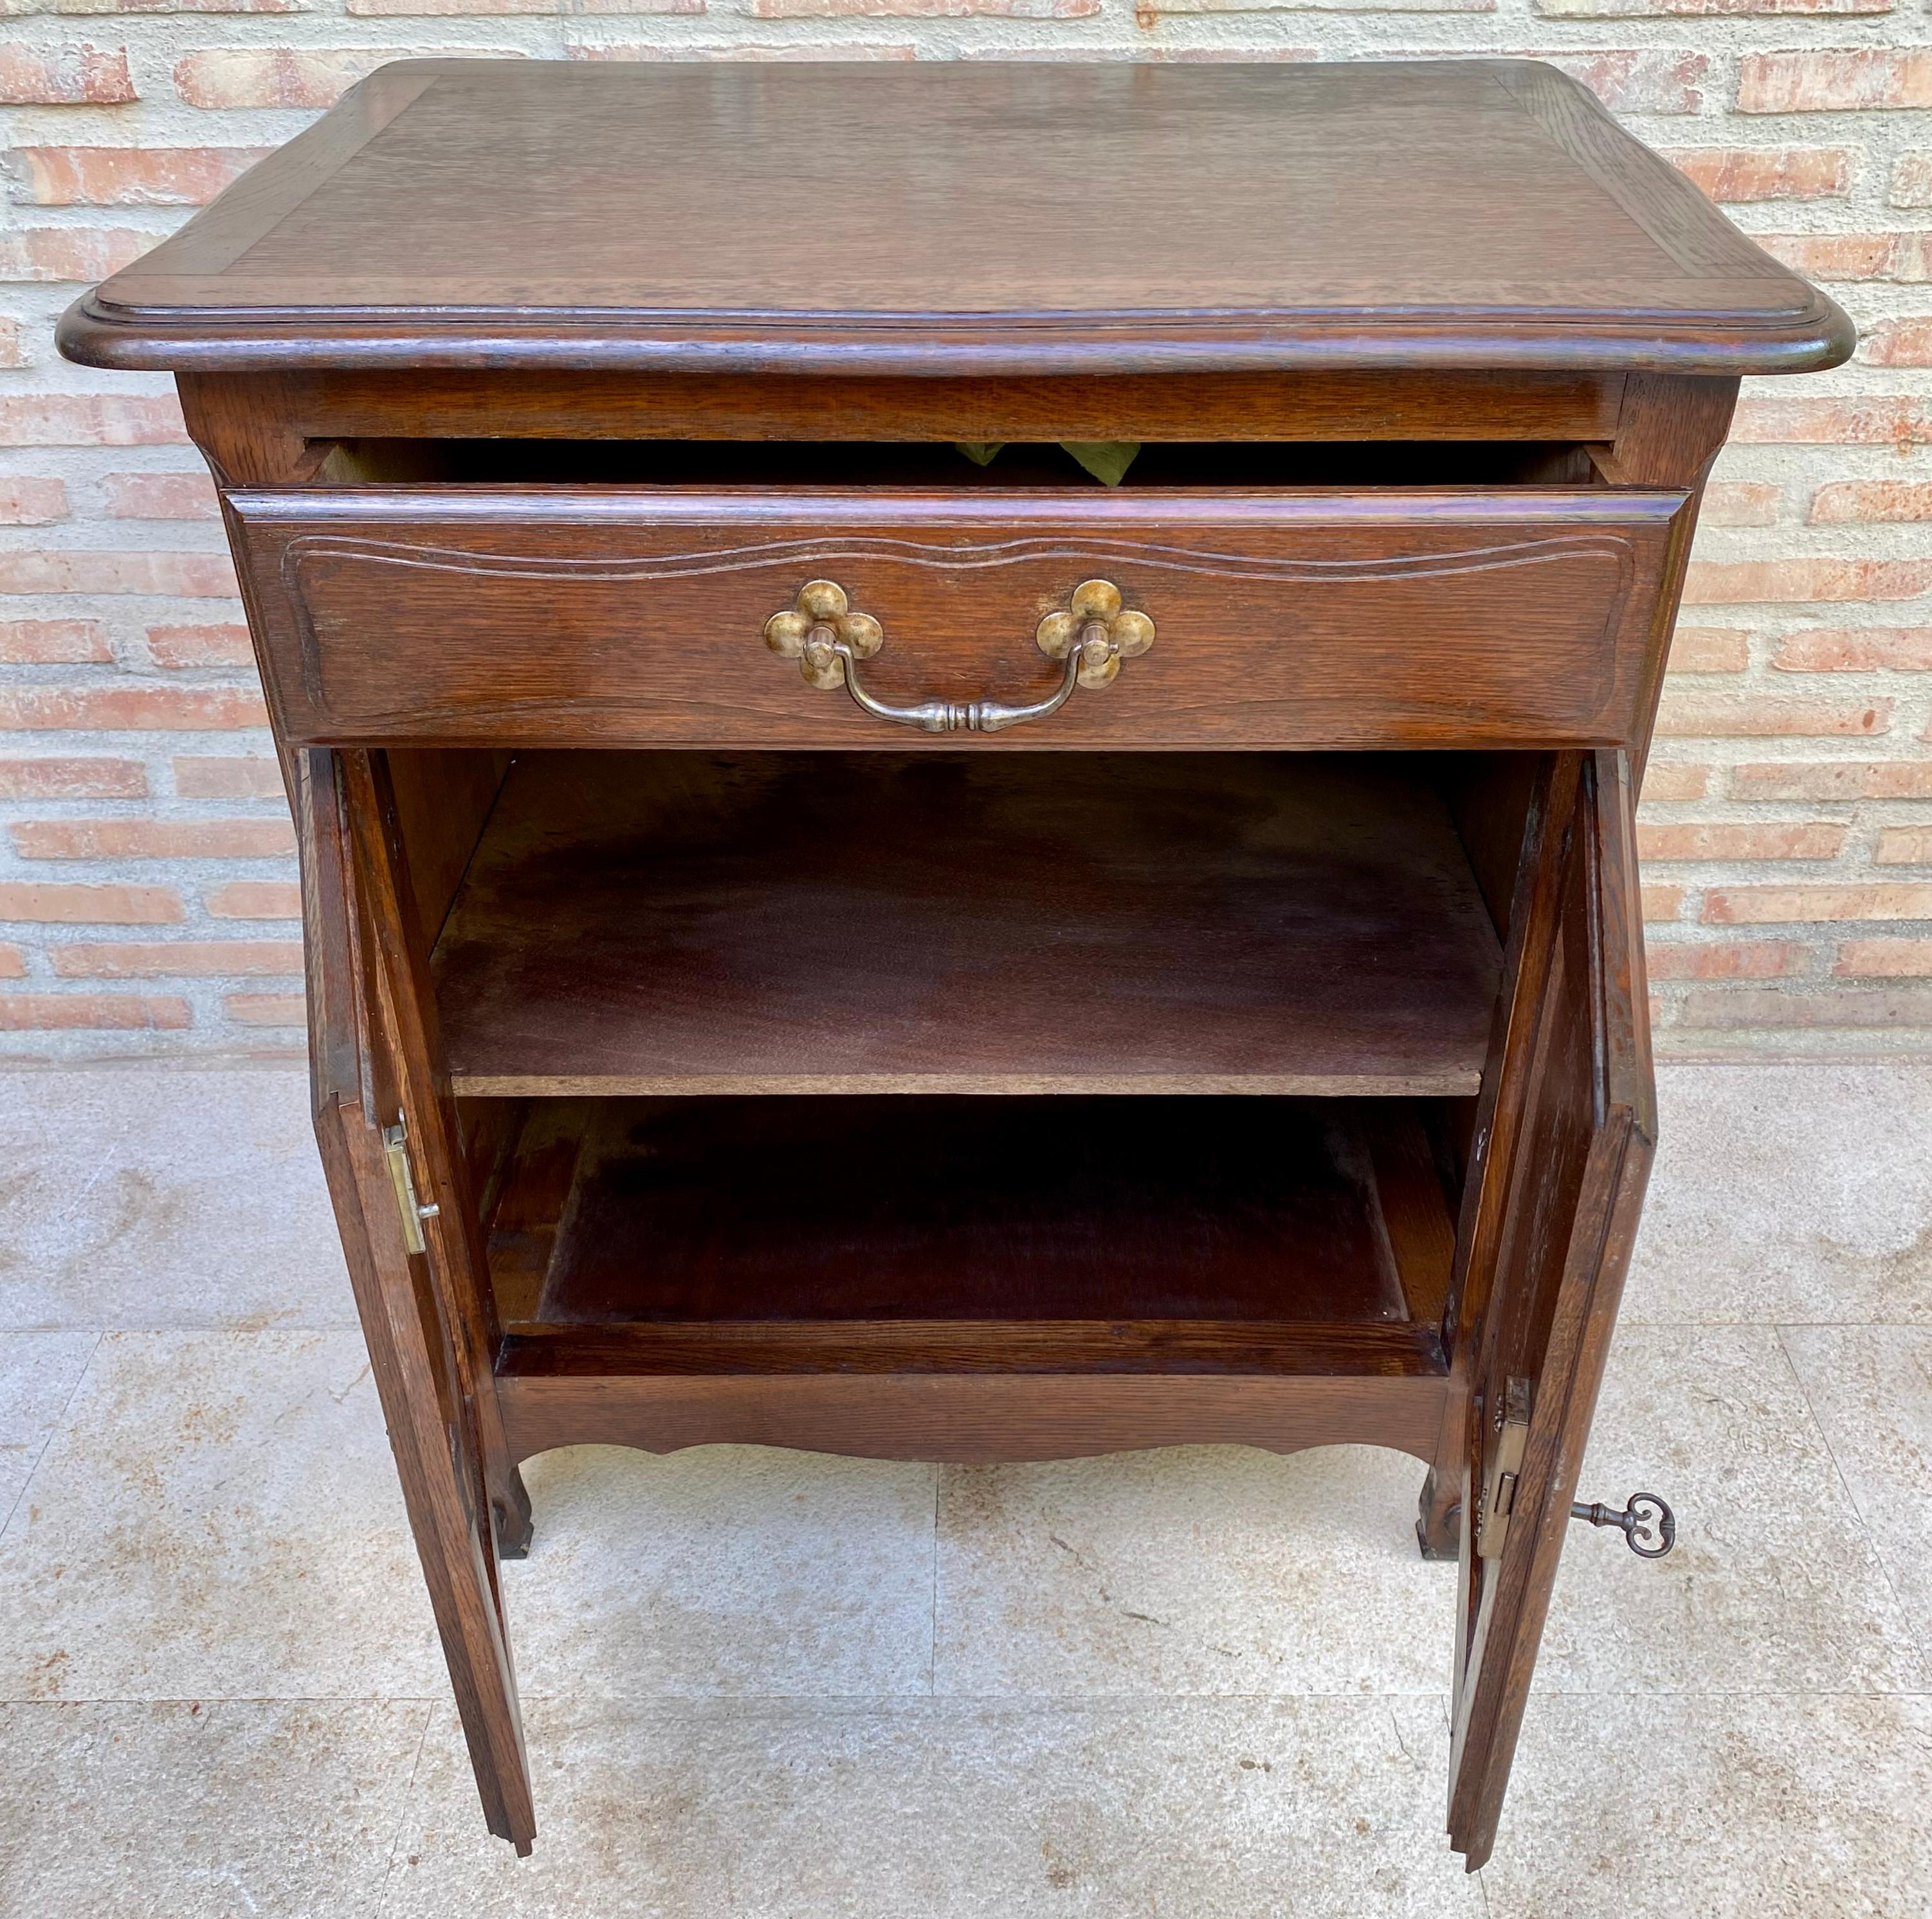 Mid-Century French Walnut Side Table with One Drawer and Double Door, 1950s For Sale 3